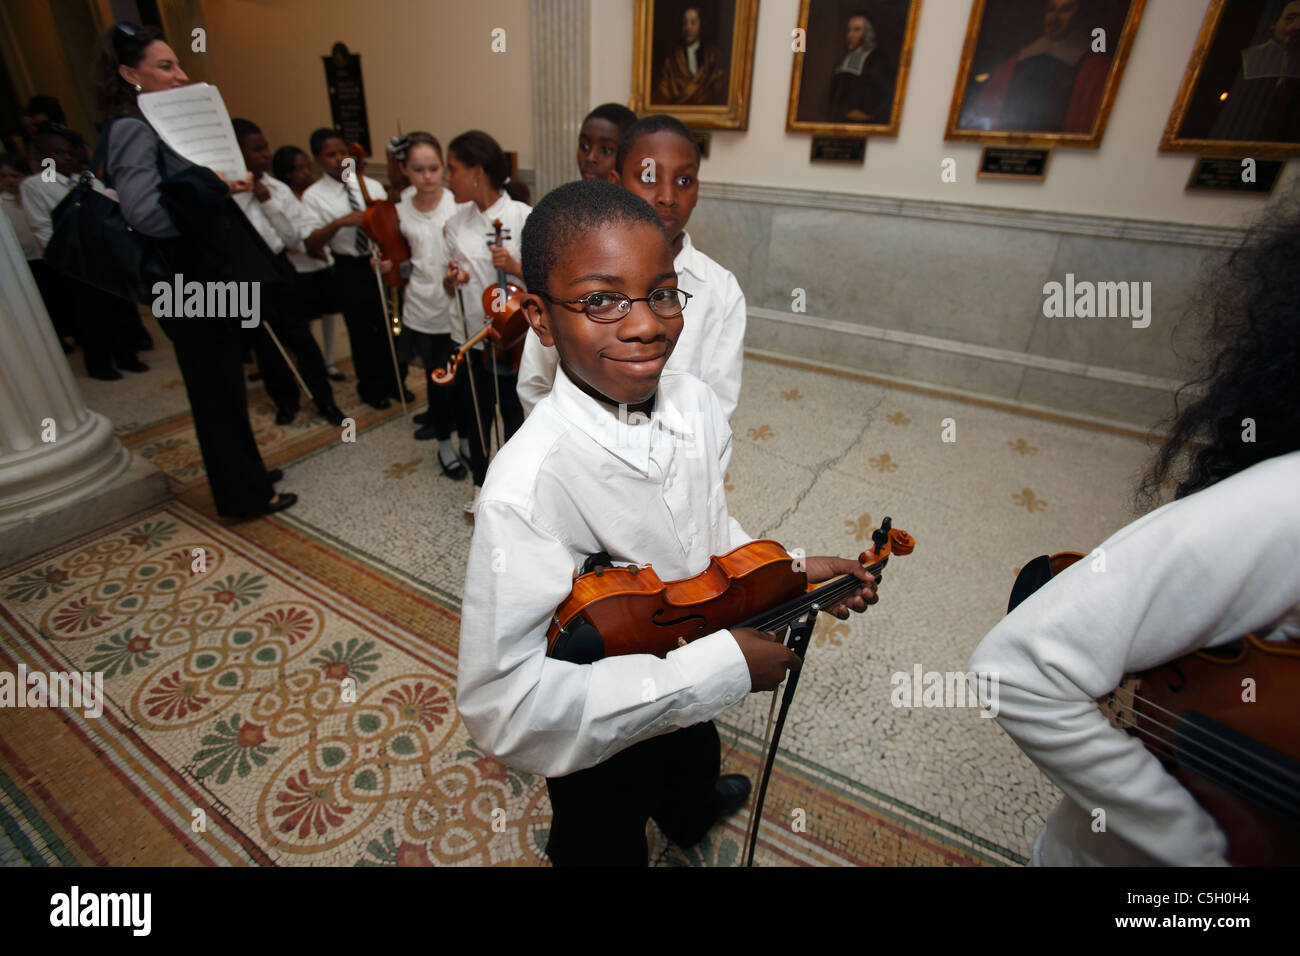 Inner-city Middle school music students ready for a performance of classical music Stock Photo